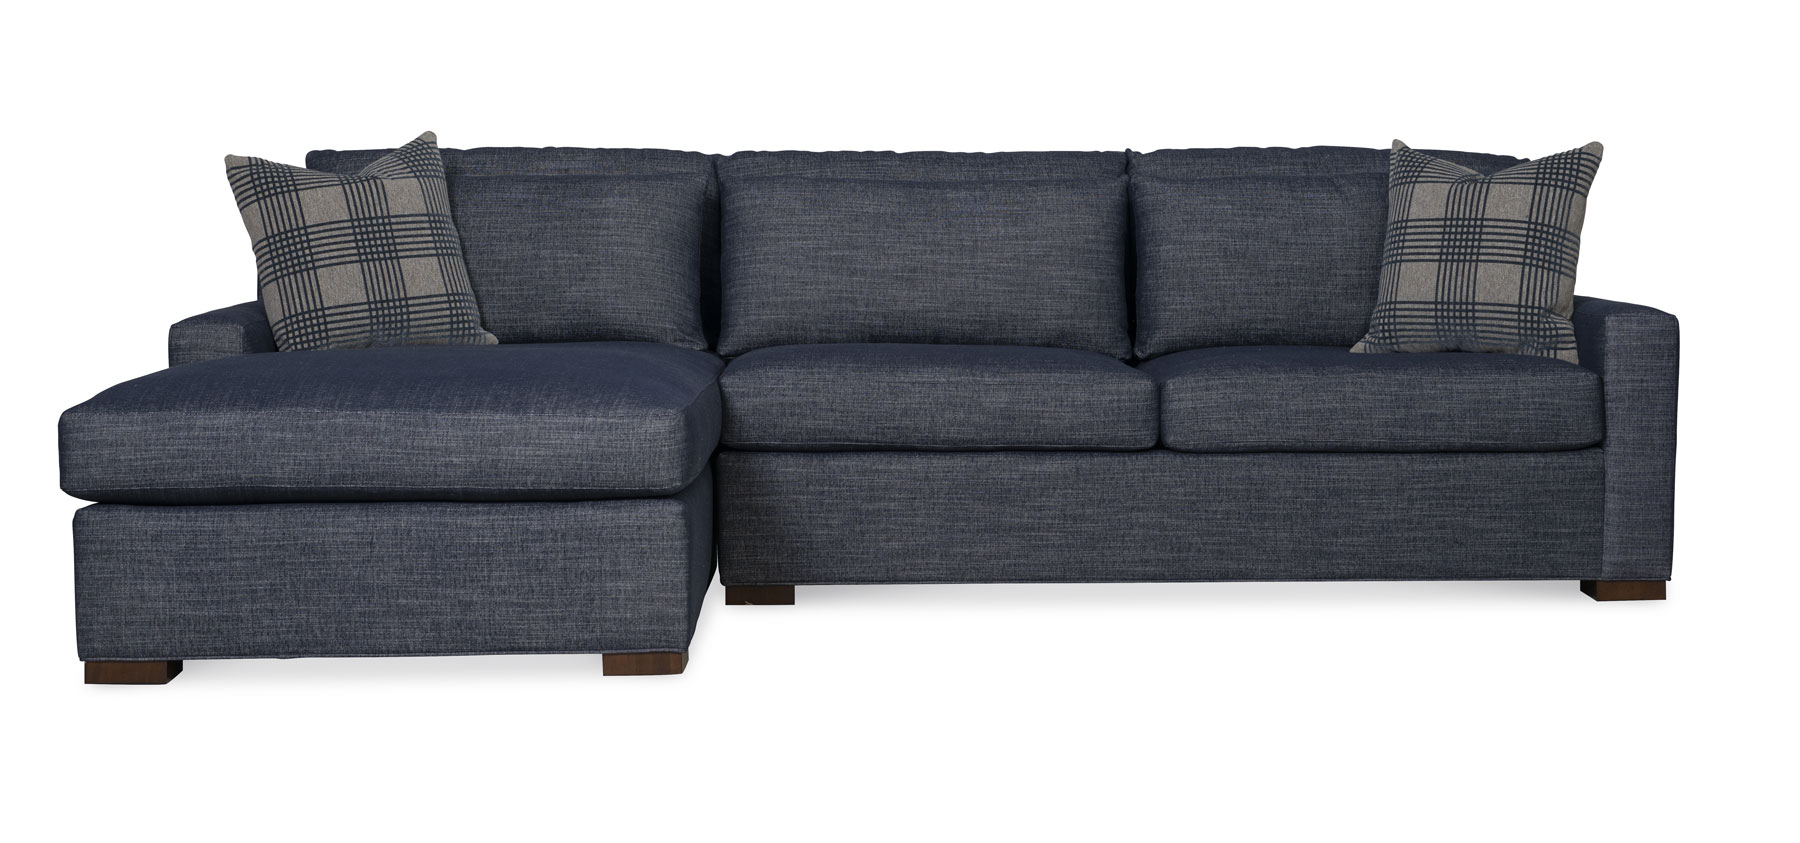 Wesley Hall 2576 Nest Sectional